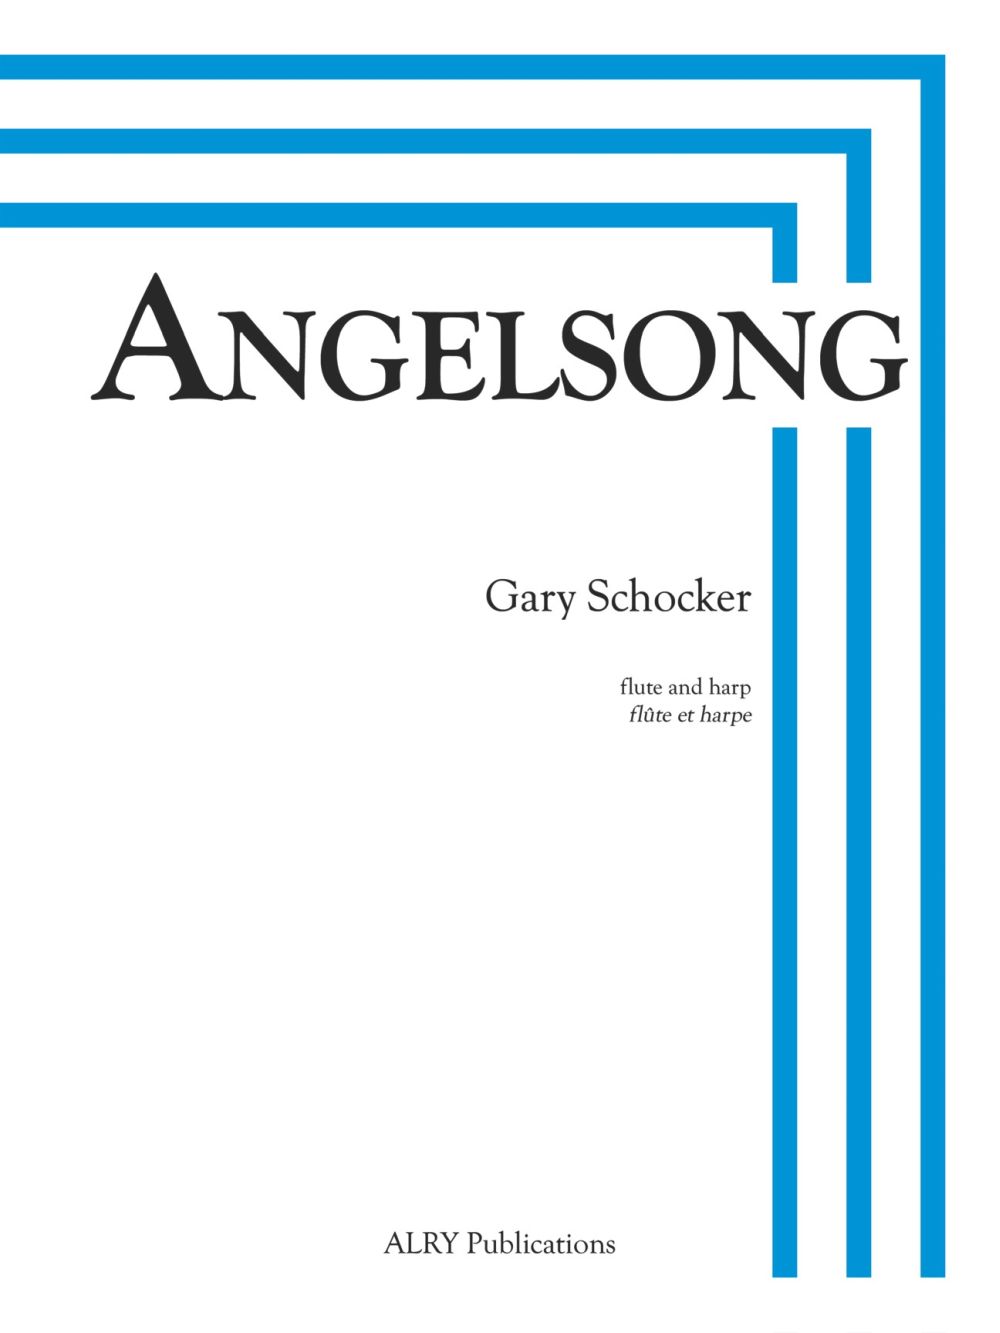 Angelsong For Flute And Harp (SCHOCKER GARY)